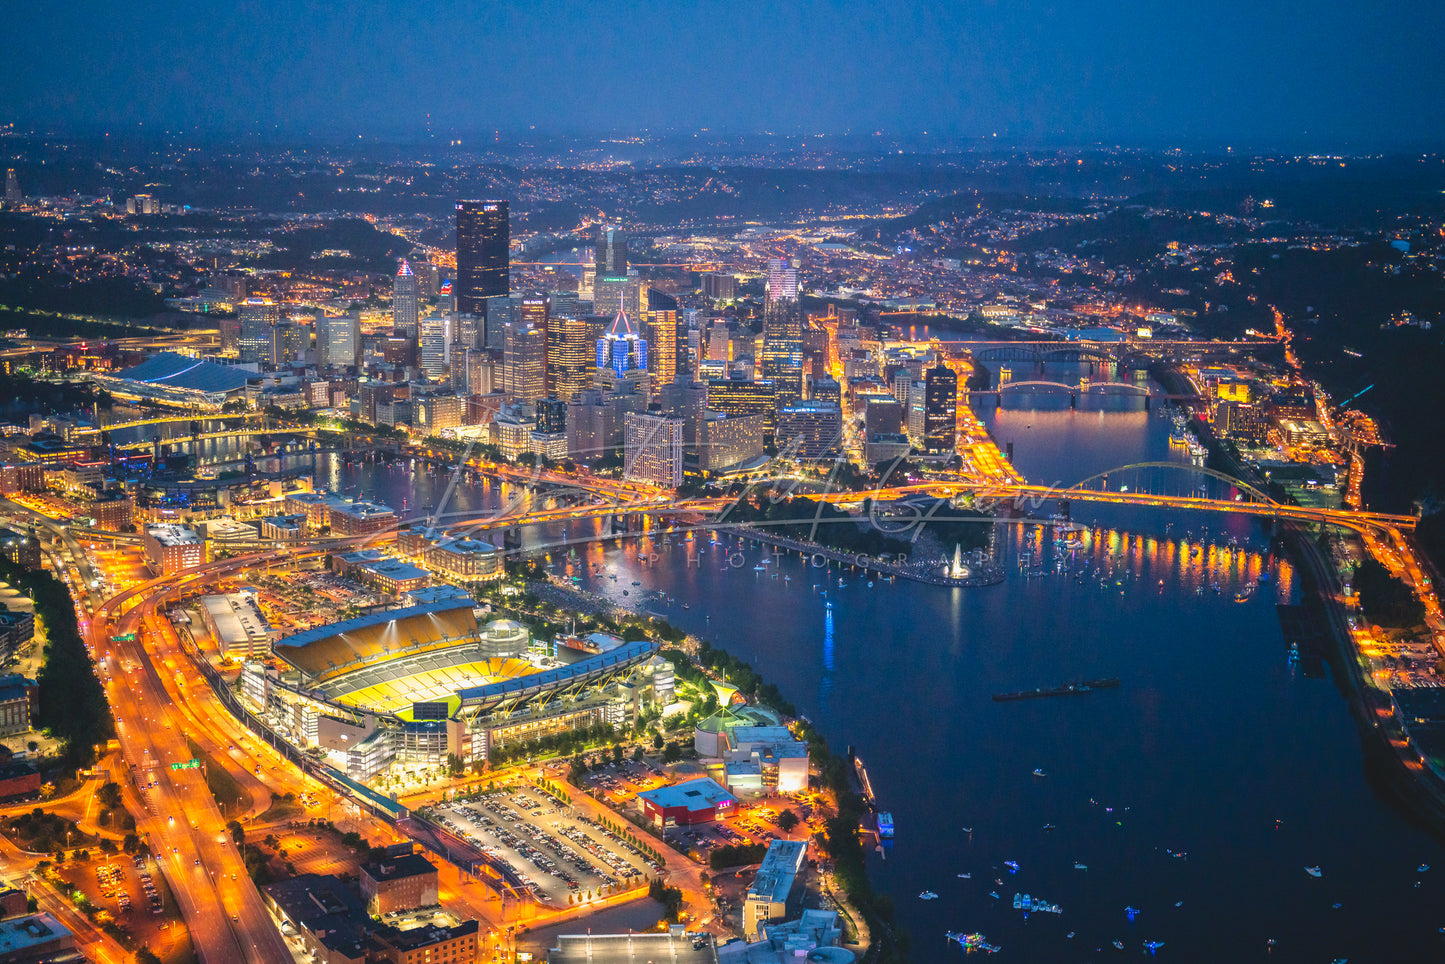 Pittsburgh at Night from Above